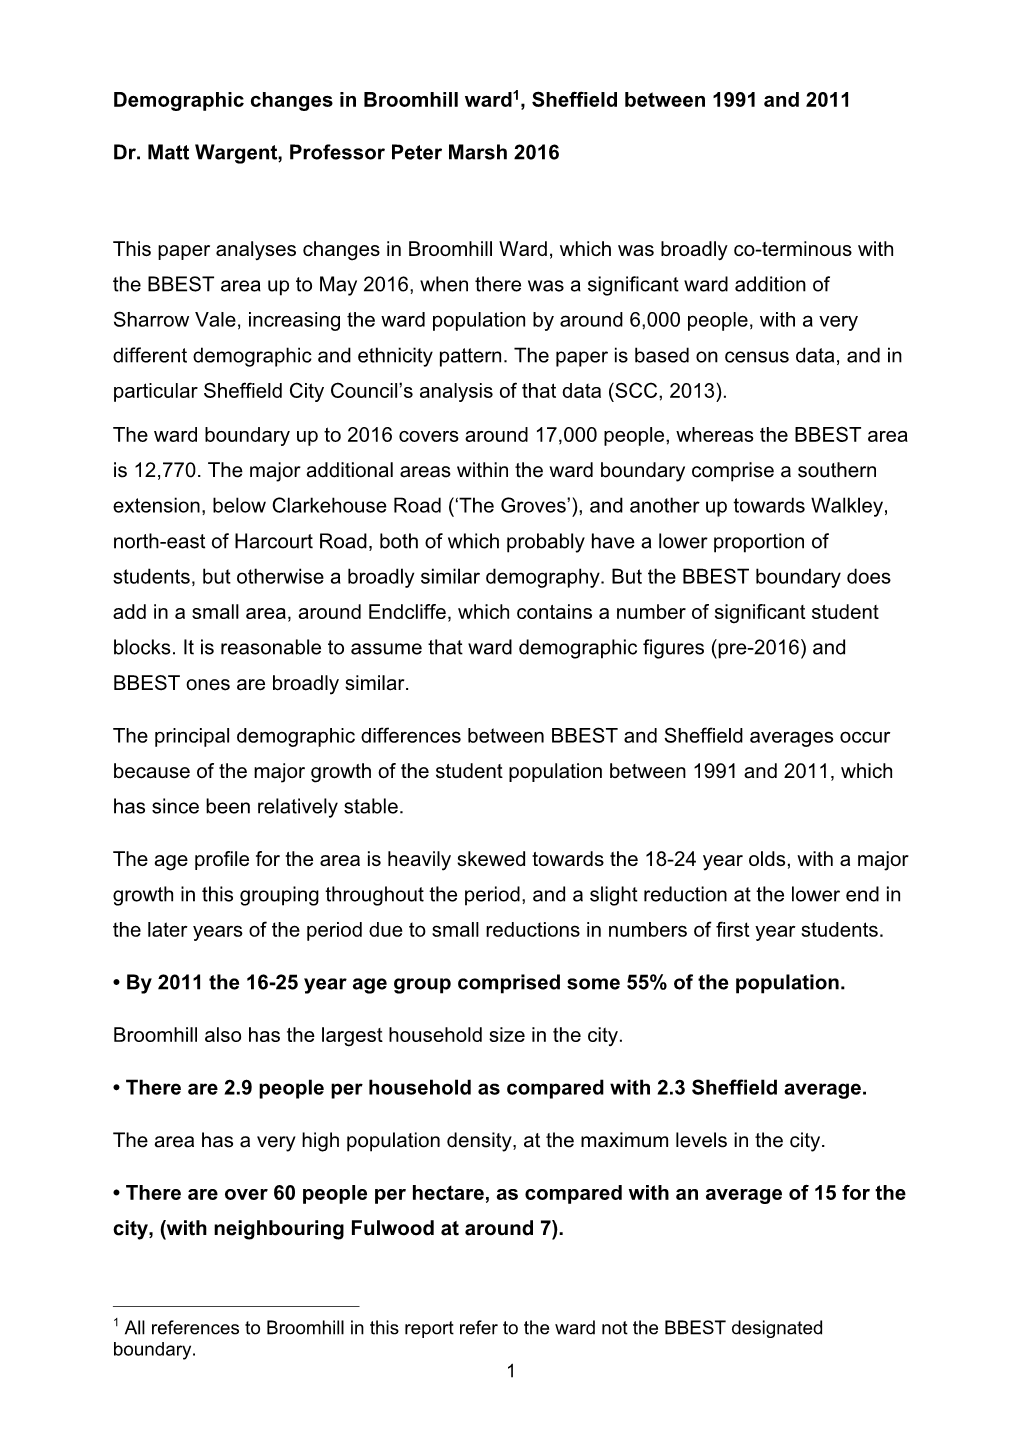 Demographic Changes in Broomhill Ward1, Sheffield Between 1991 and 2011